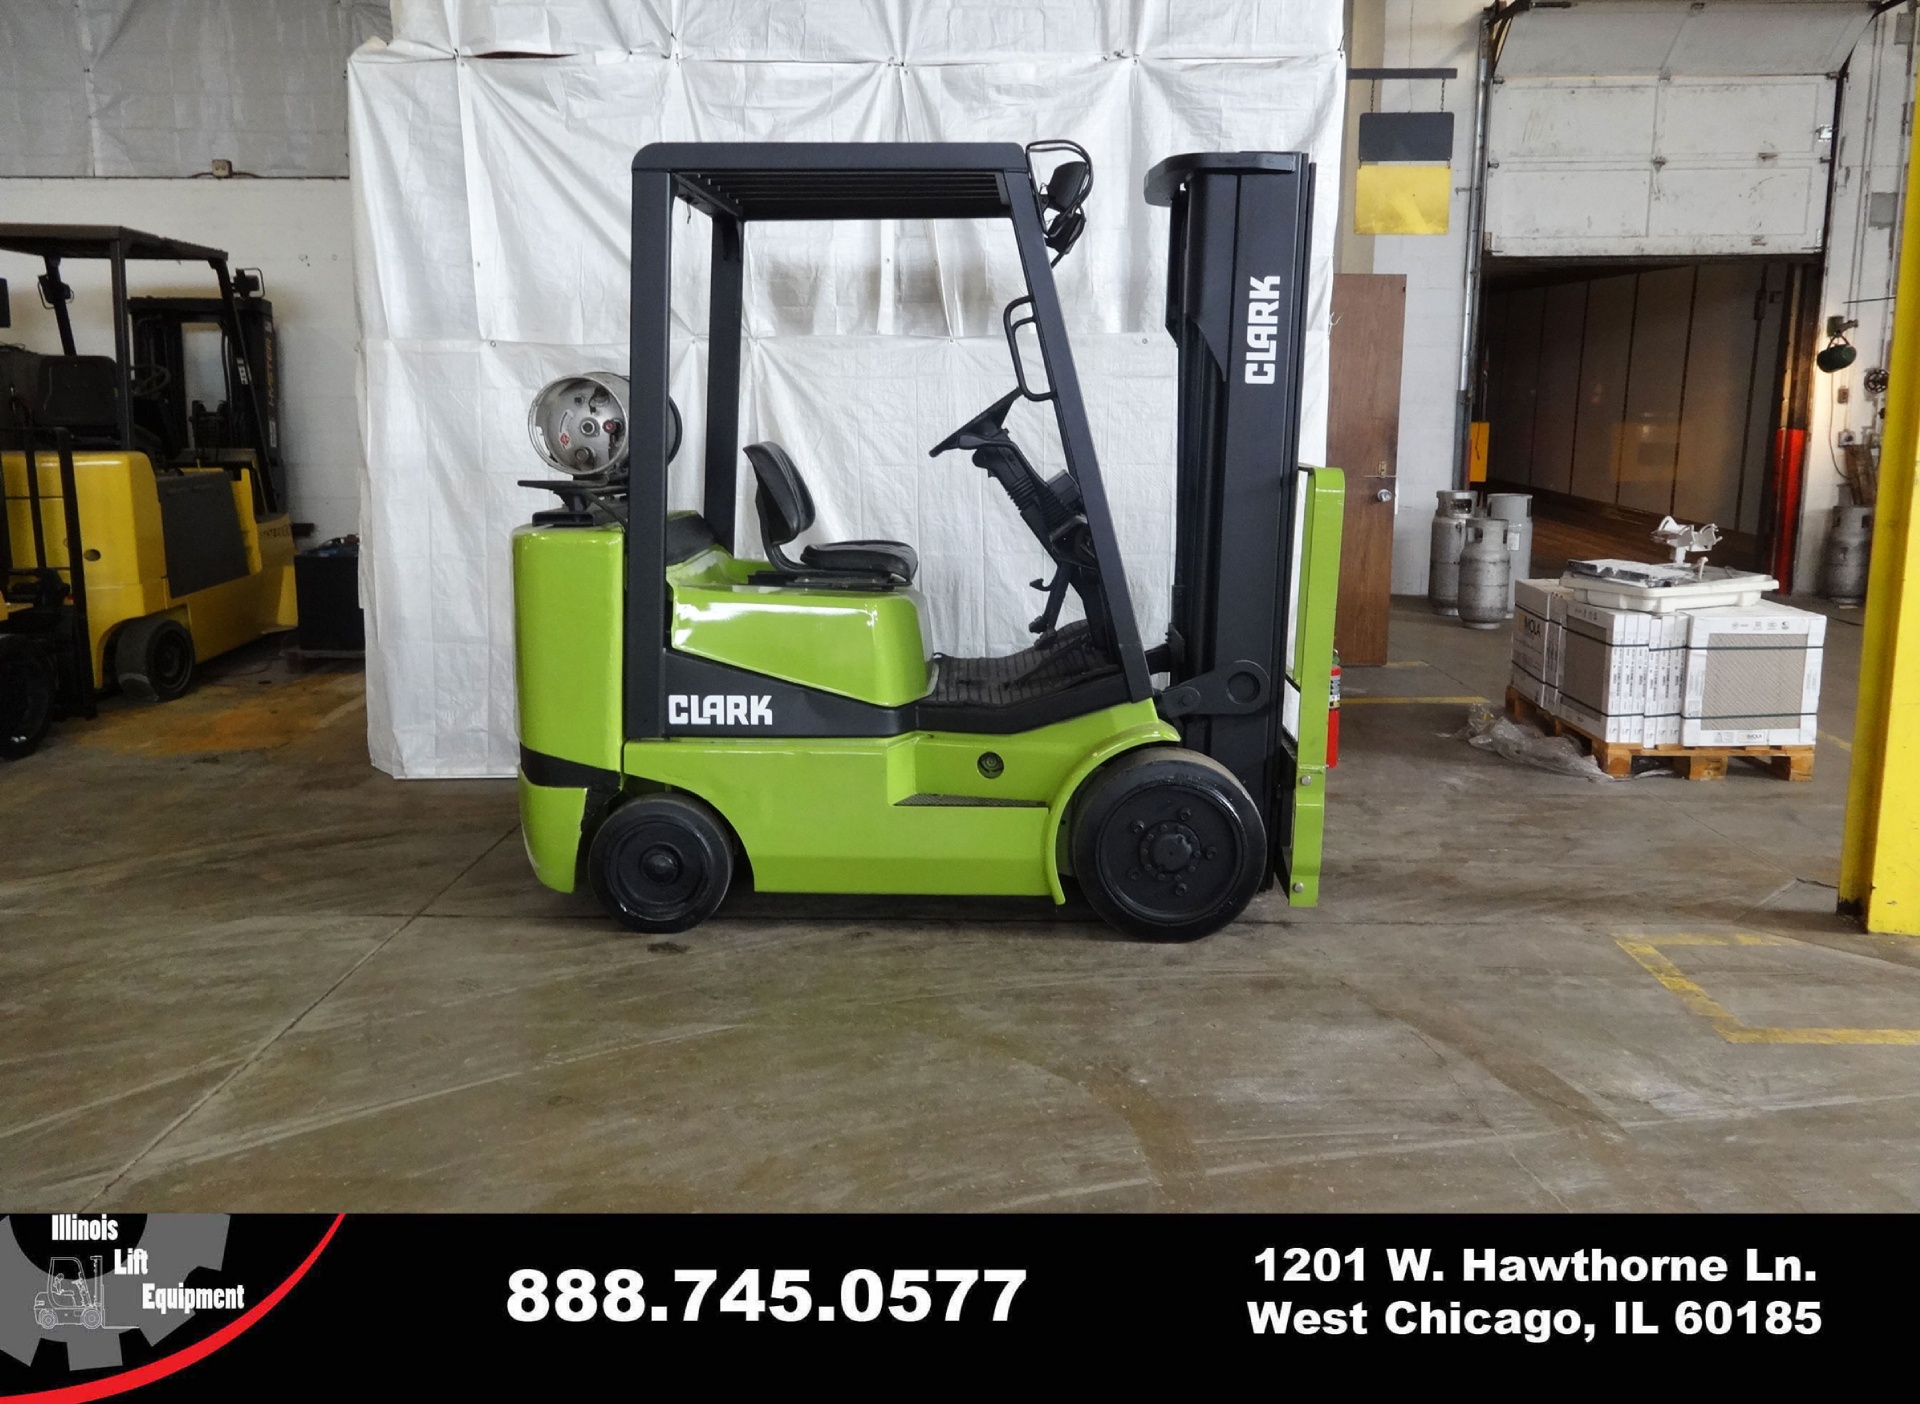  Clark C25 Forklift on Sale in Indiana 